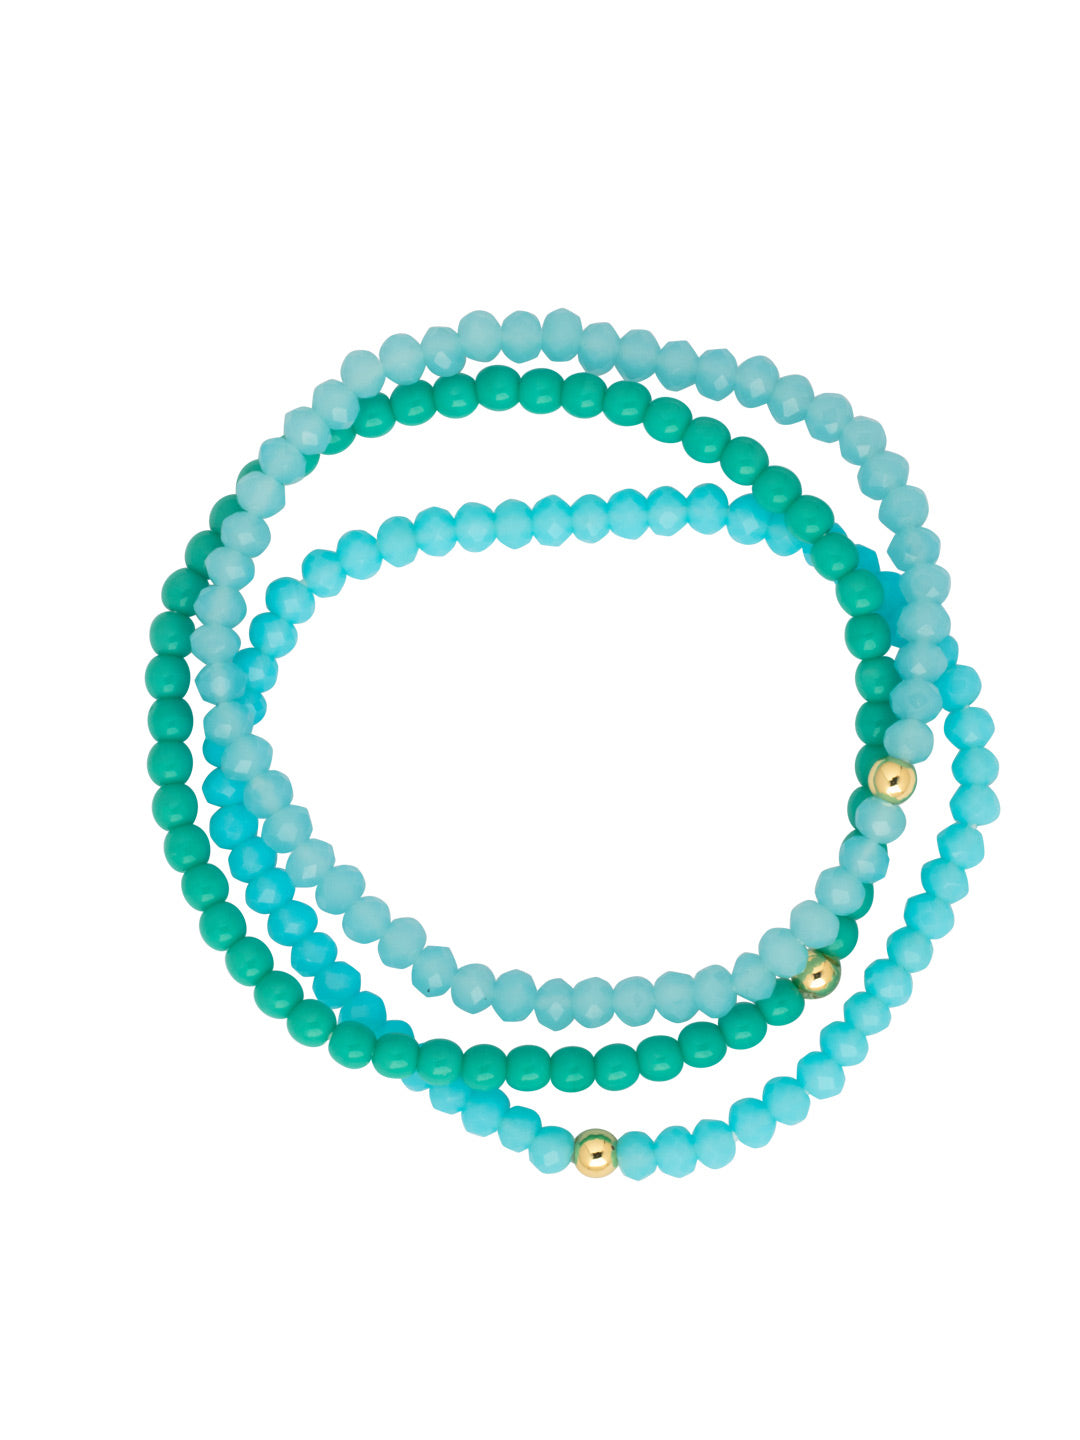 Set of 3 Beaded Stretch Bracelet - BFM4BGSTO - <p>The Set of 3 Beaded Stretch Bracelets features 3 assorted beaded stretch bracelets; perfect to mix, match, and stack with your favorite bracelets! From Sorrelli's Santorini collection in our Bright Gold-tone finish.</p>